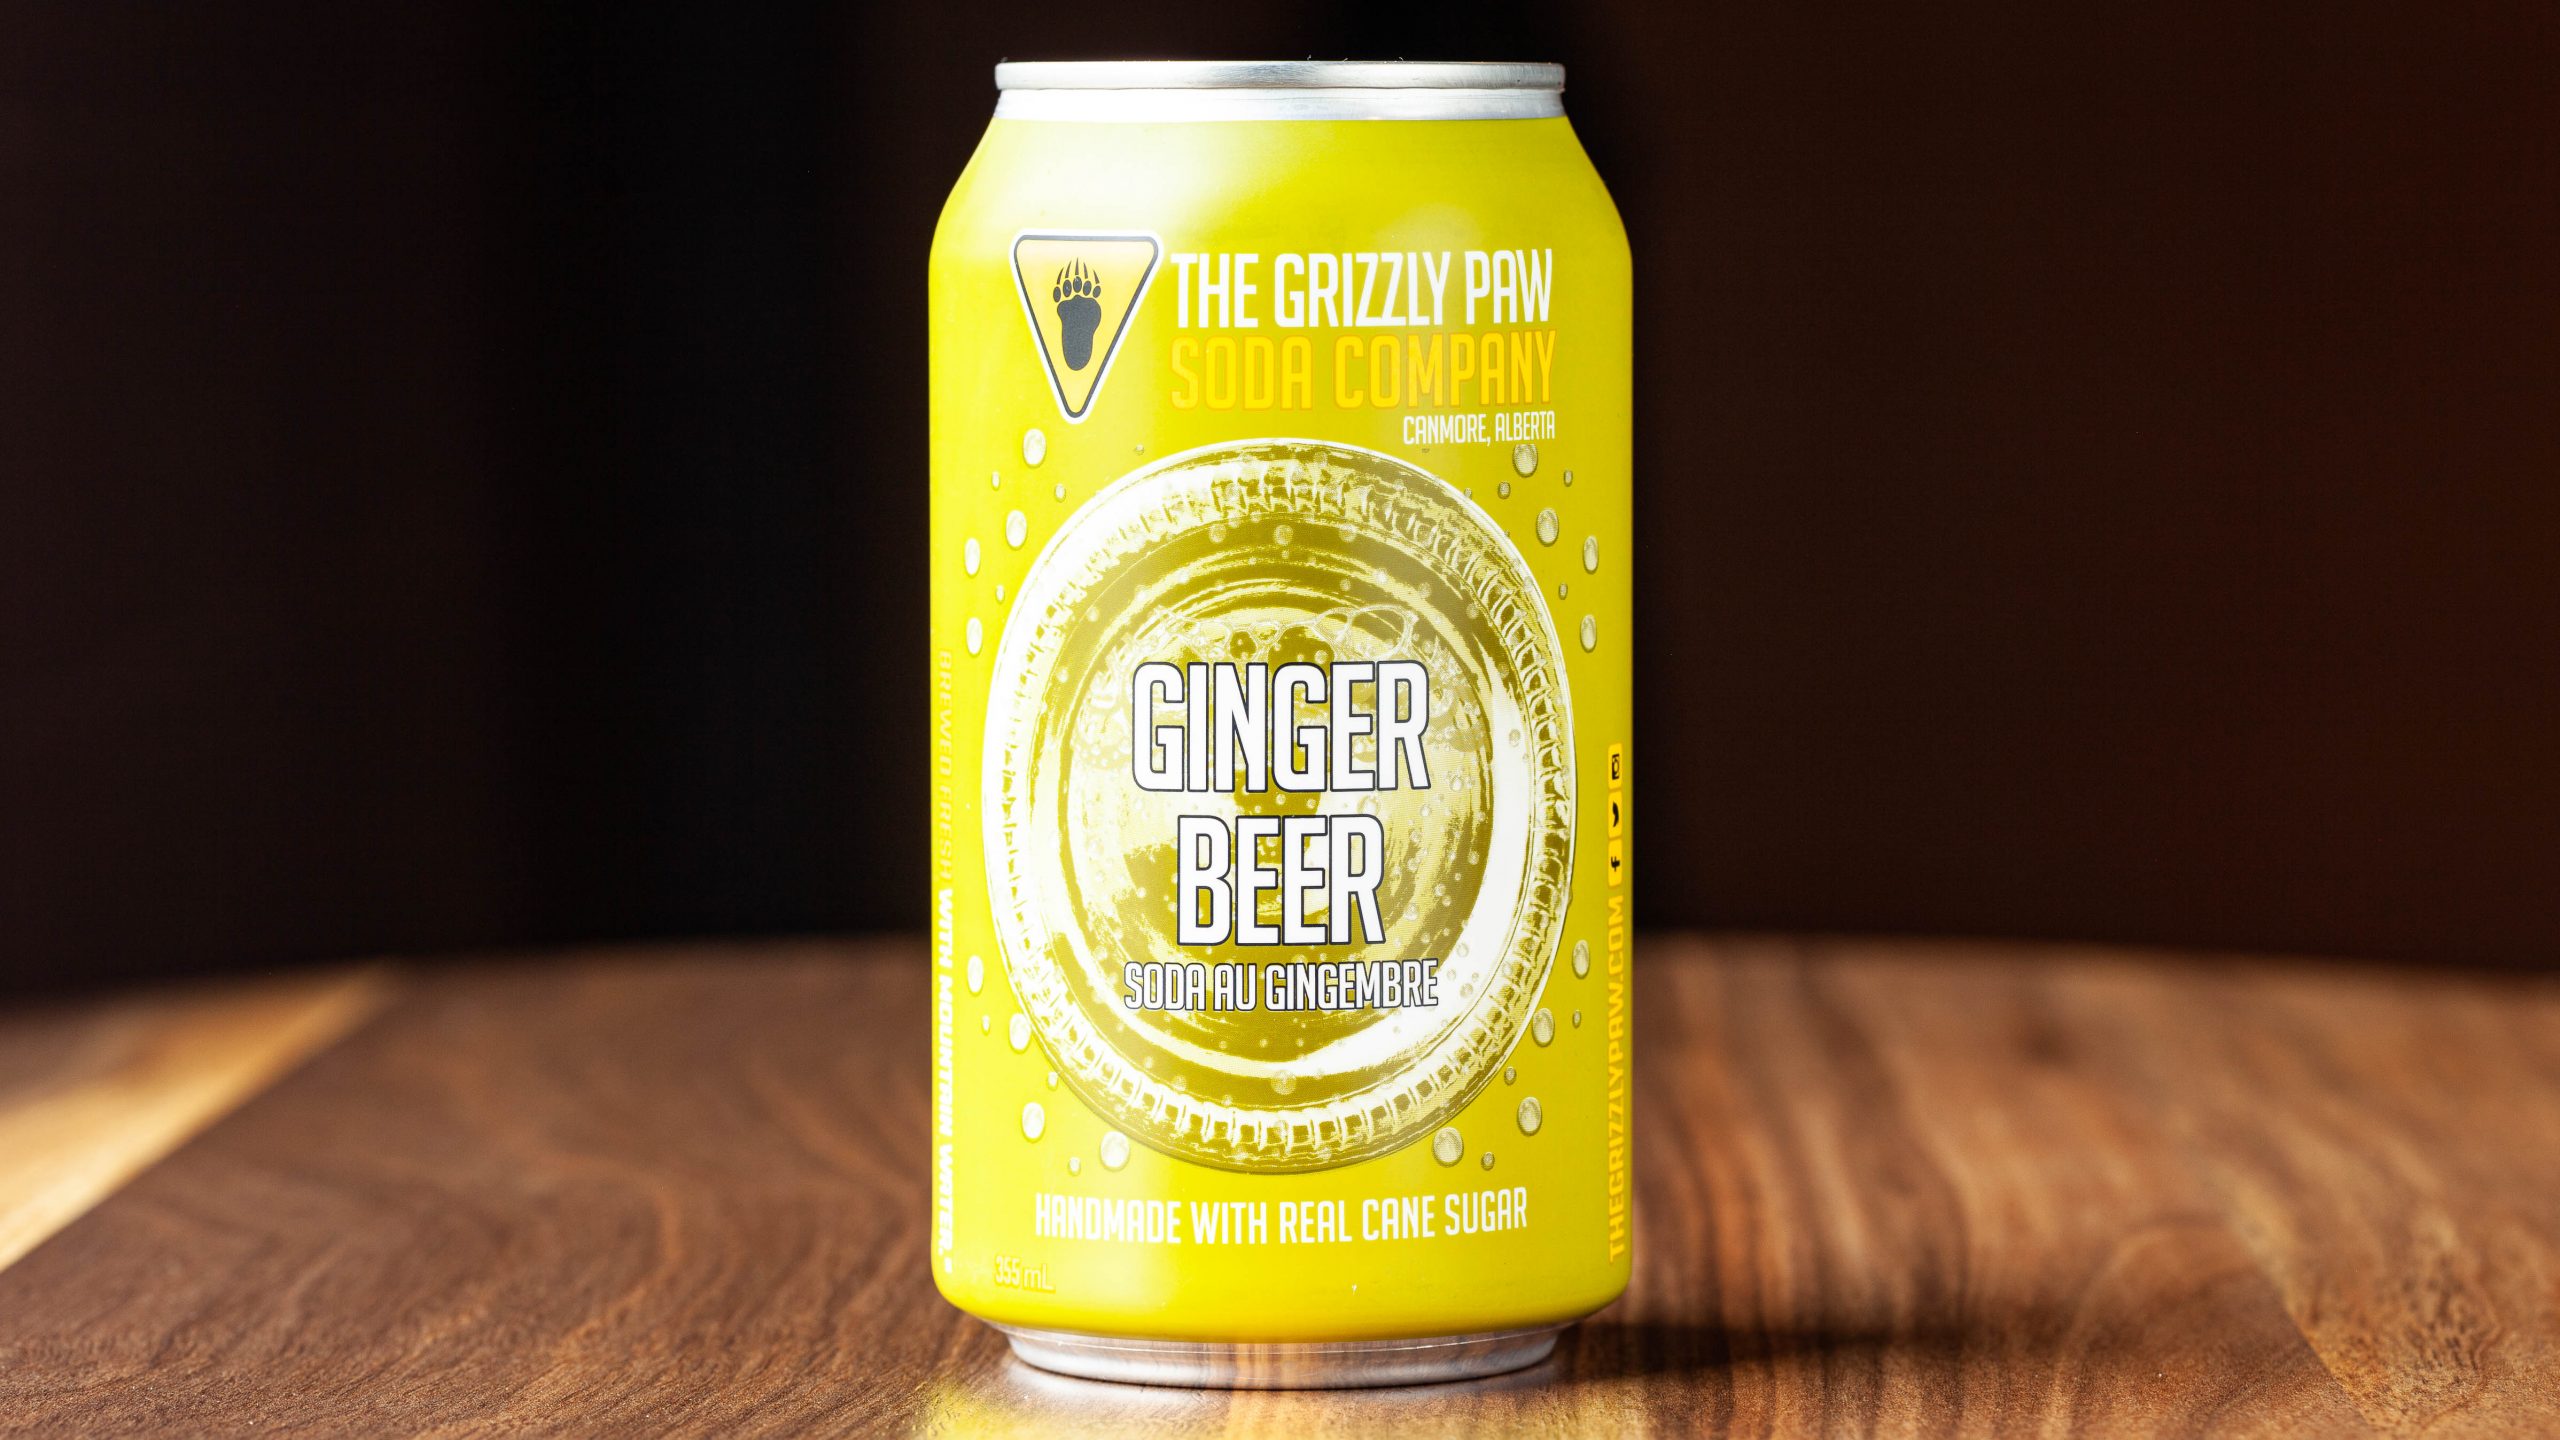 A 355-mL can of Grizzly Paw Ginger Beer, made locally in Canmore, Alberta.